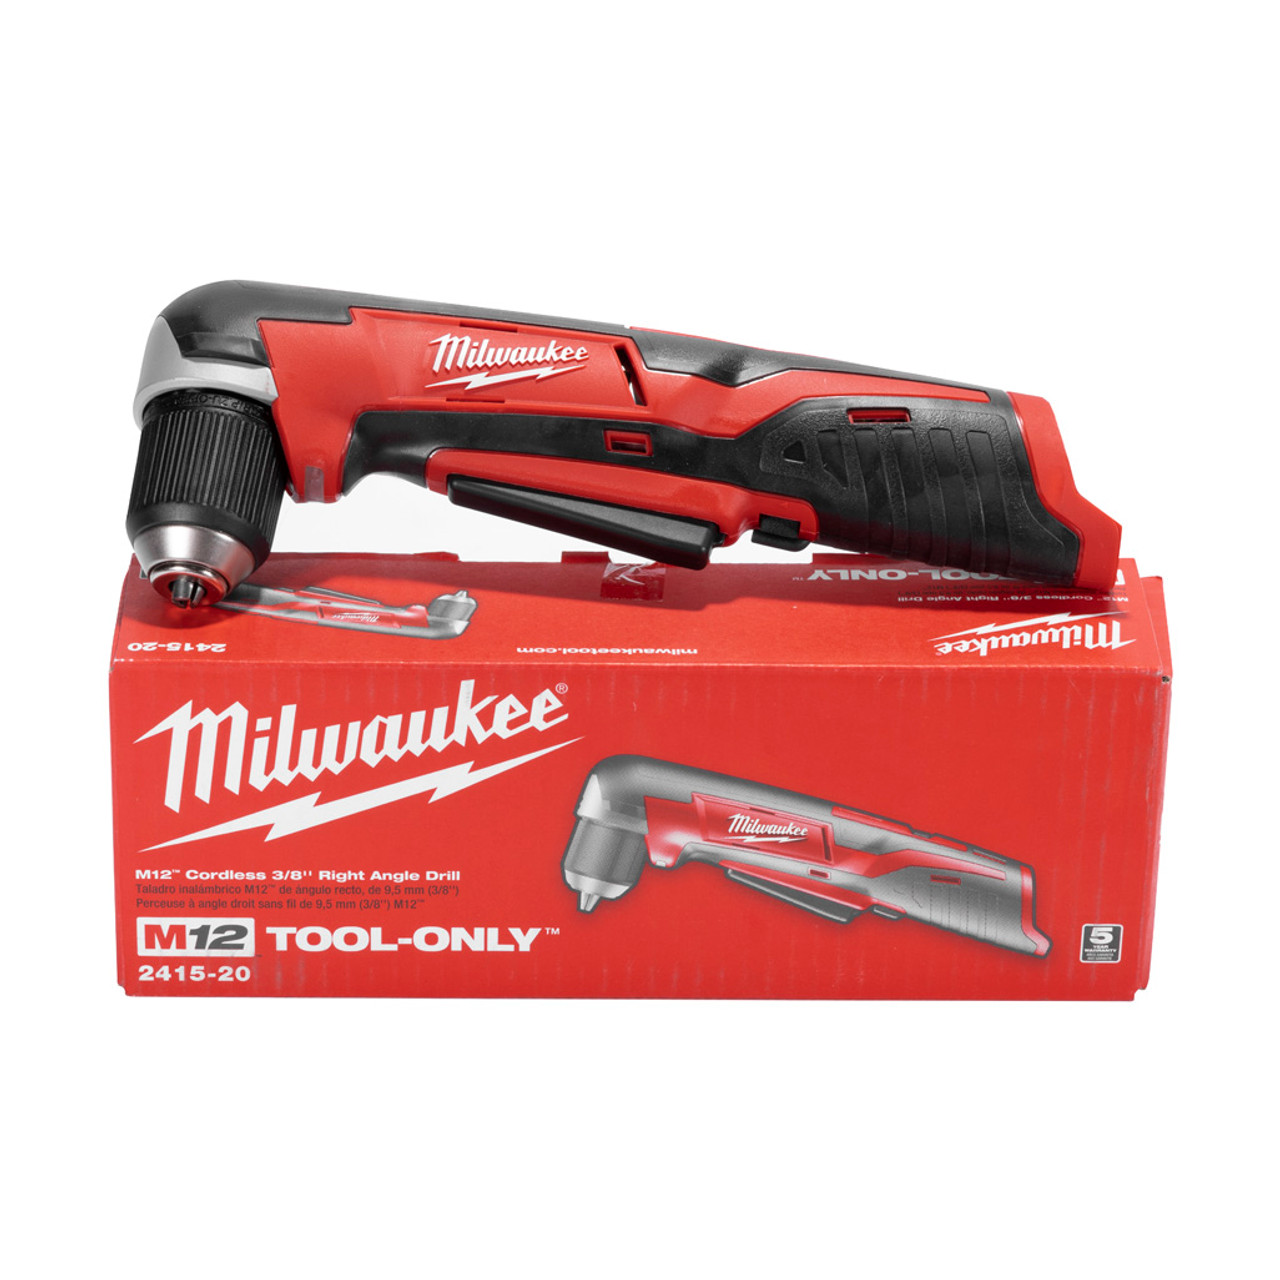 Milwaukee M12 Right Angle Drill Driver 3/8-Inch 800 Rpm Cordless (2415-20)